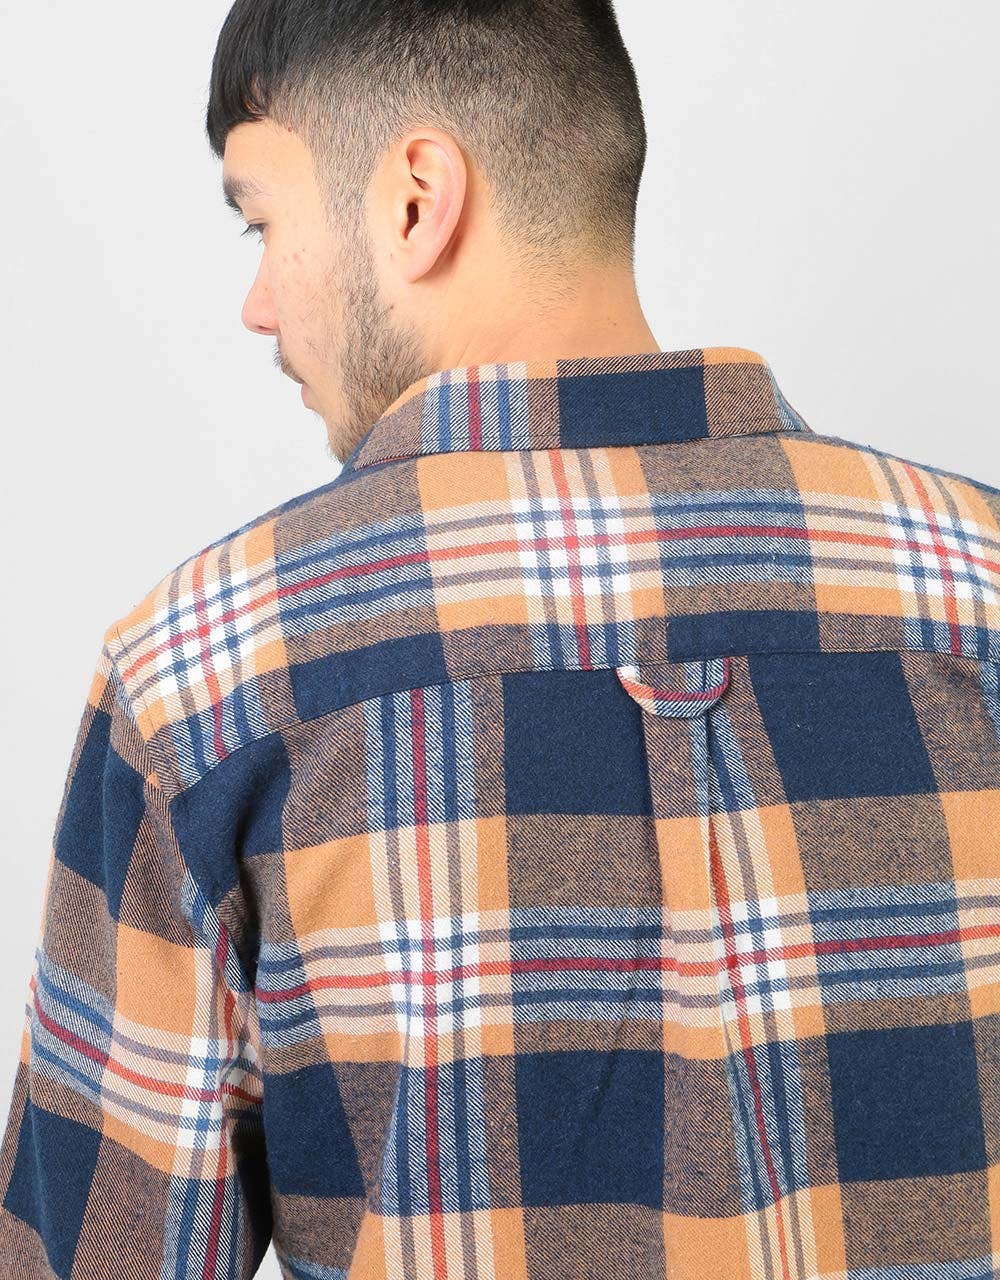 Route One Flannel Shirt - Brown/Navy/White